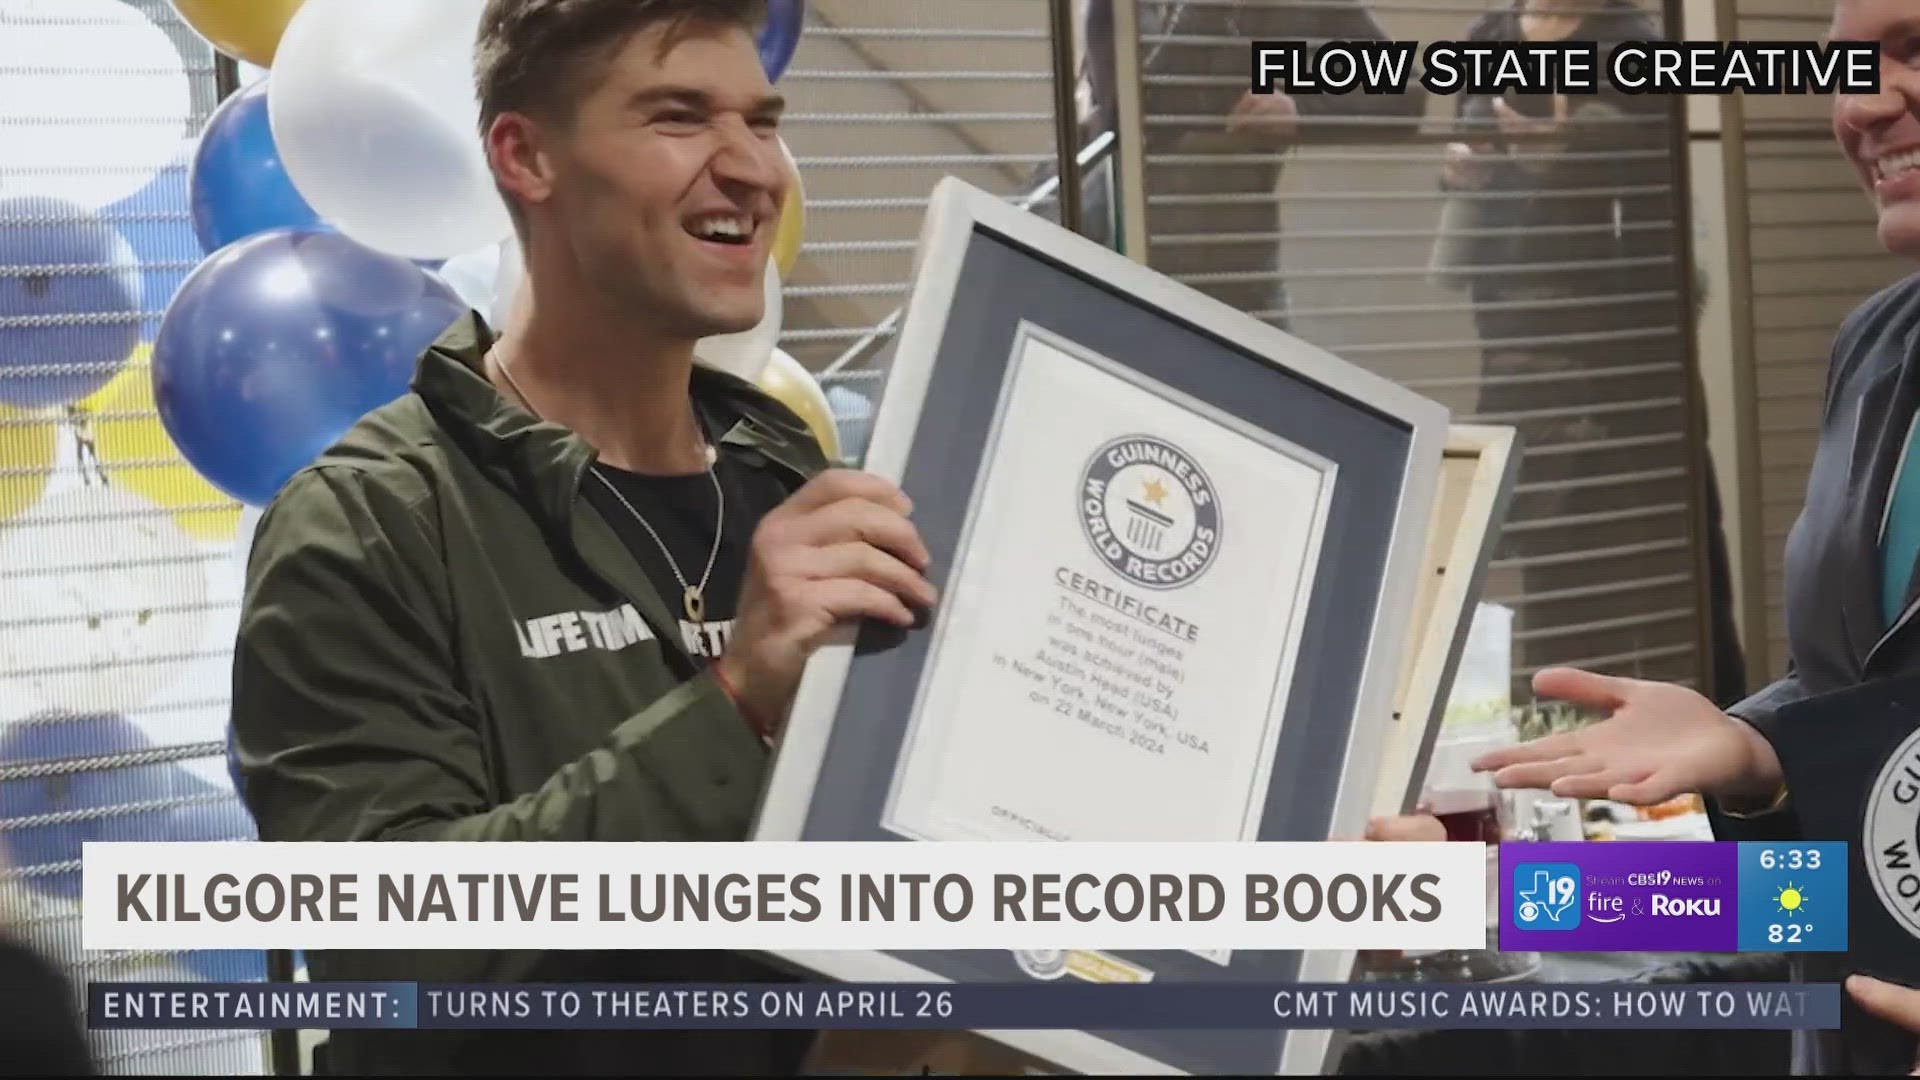 Kilgore native sets Guinness World Records for lunging